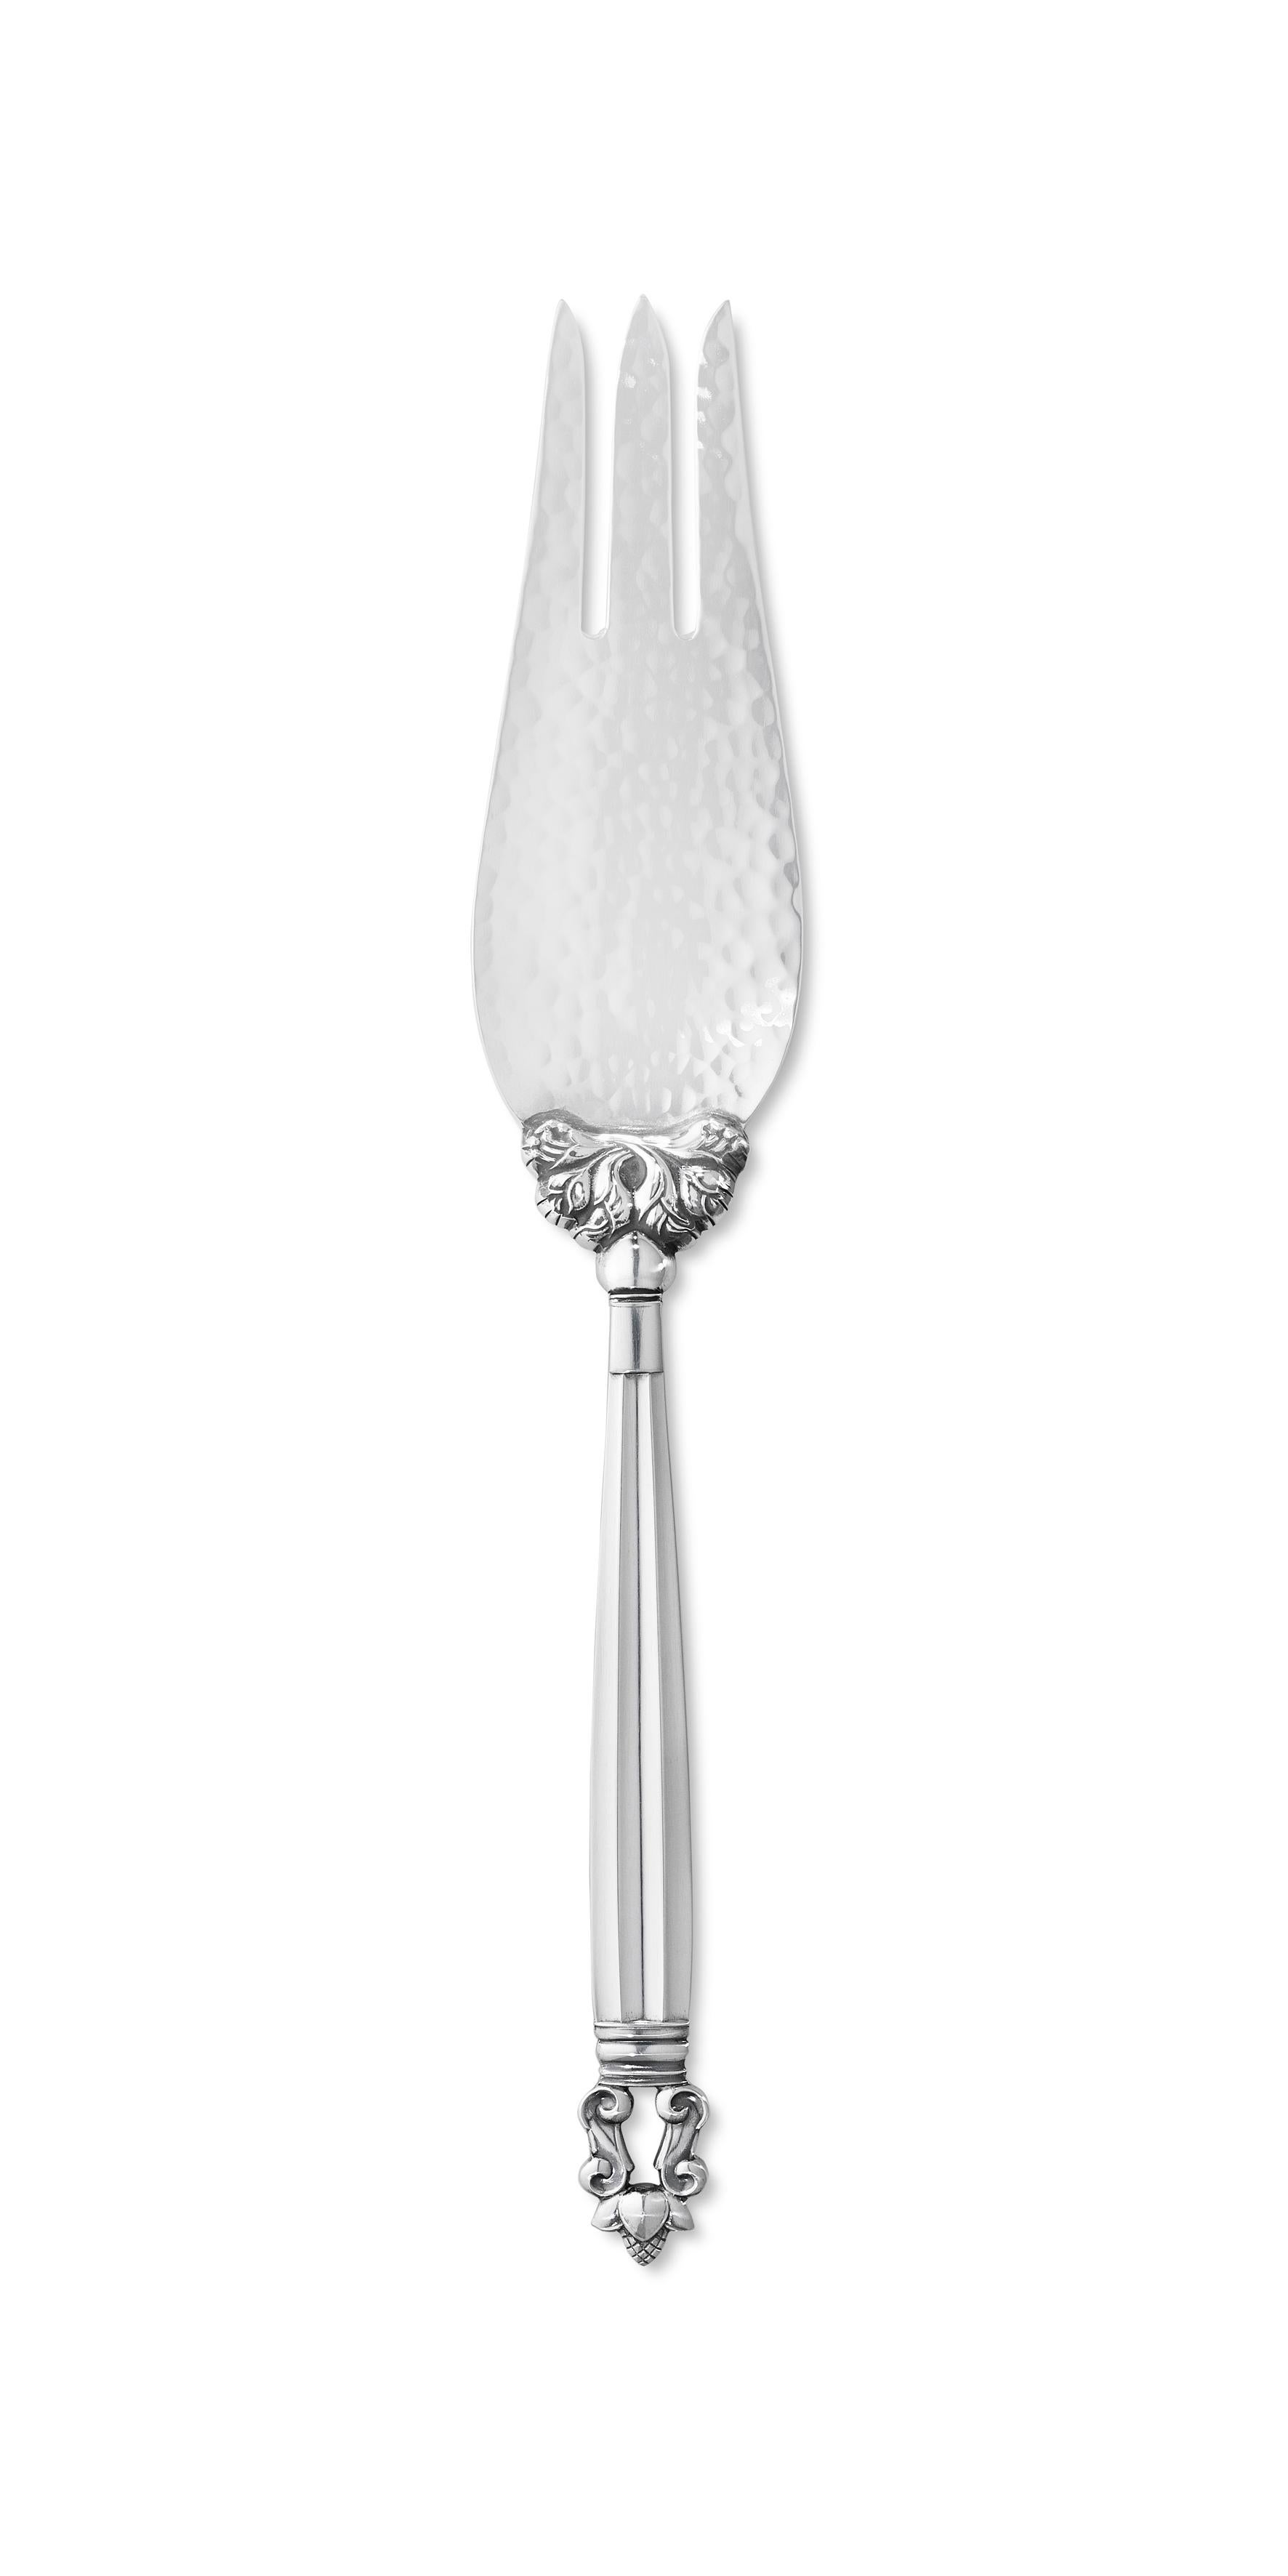 Designed in 1915 by Johan Rohde, the Acorn sterling silver cutlery pattern represents the early foundation of Georg Jensen’s organic and timeless design language. In contrast to the Art Nouveau style of the early 1900s, Acorn’s design captures a